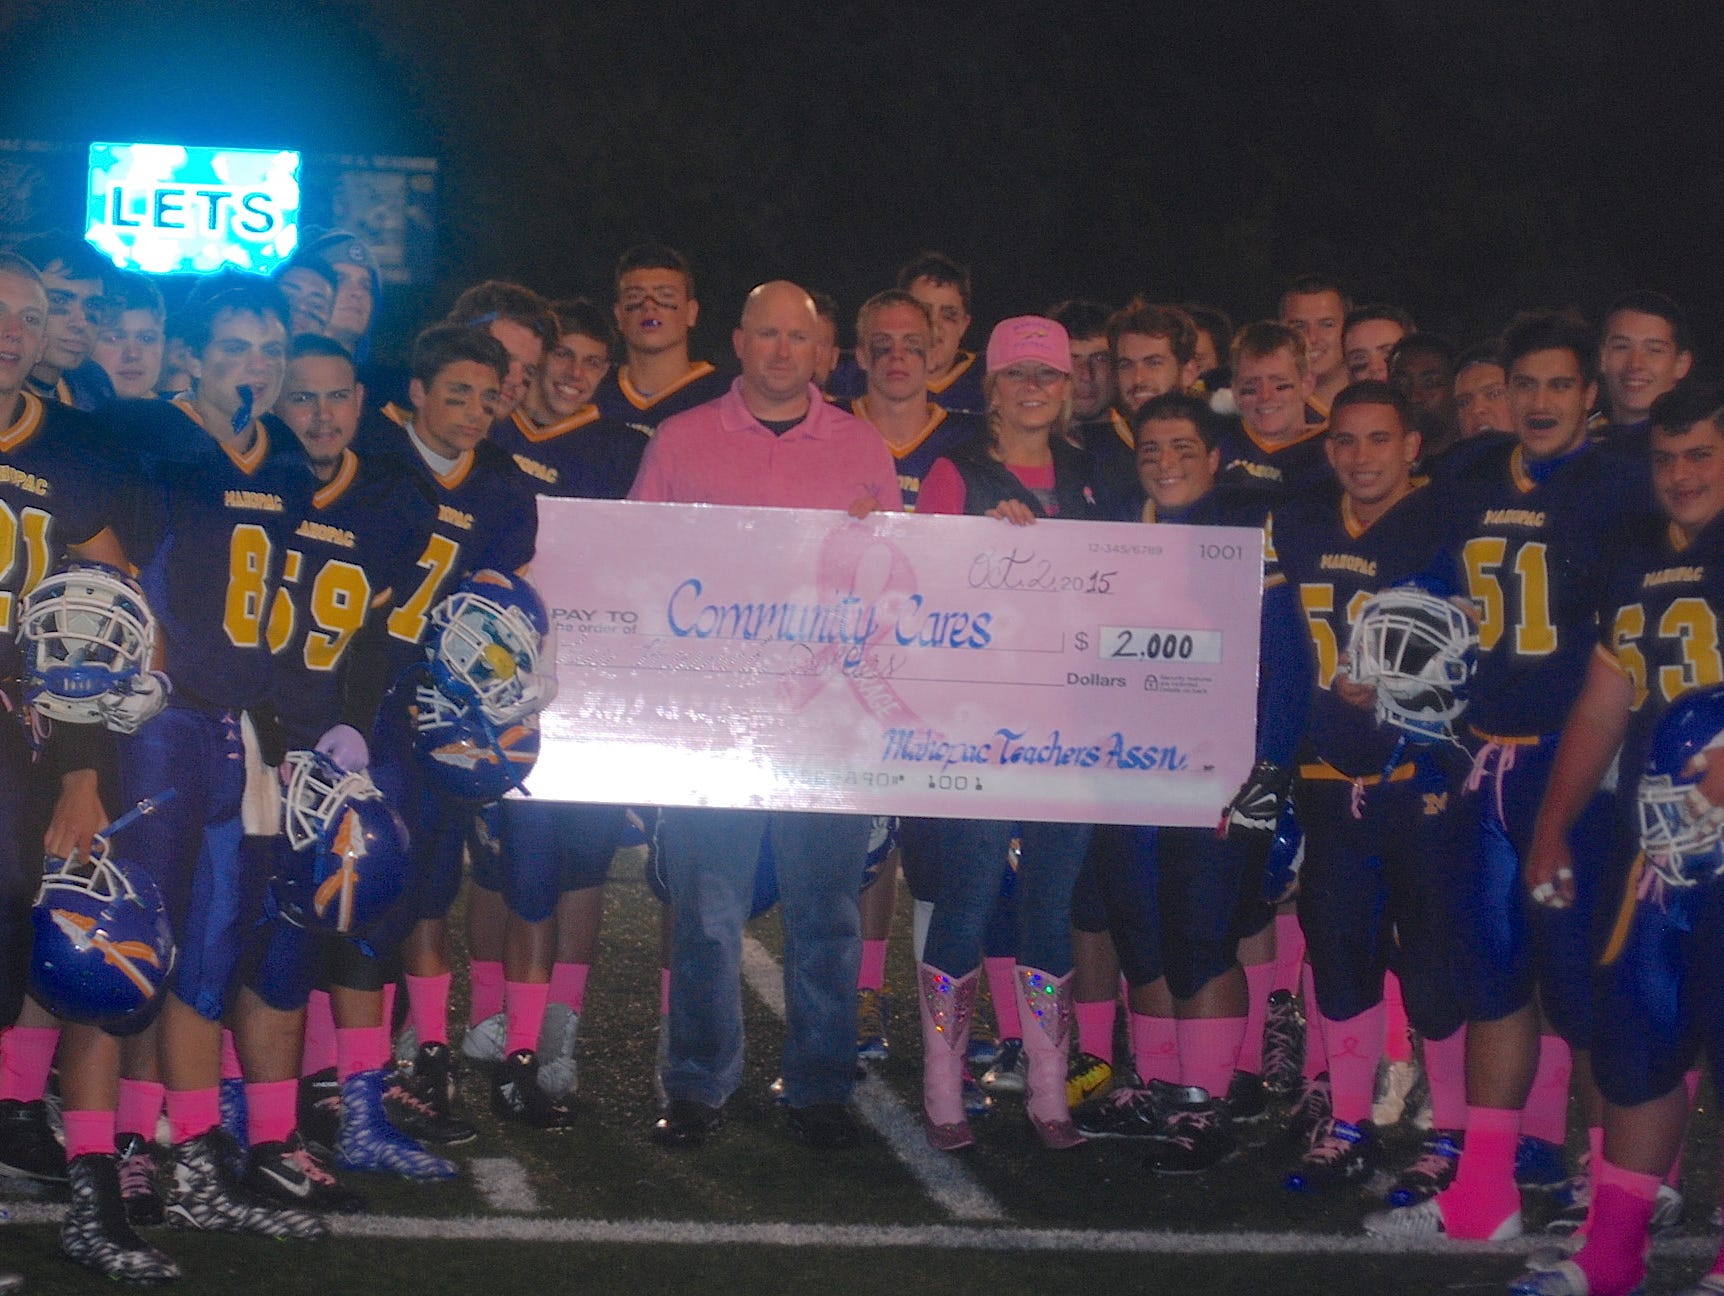 The Mahopac football team poses with a check that the school donated to Community Cares, a local non-profit, after its second annual "Pink Game" on Oct. 2, 2015.